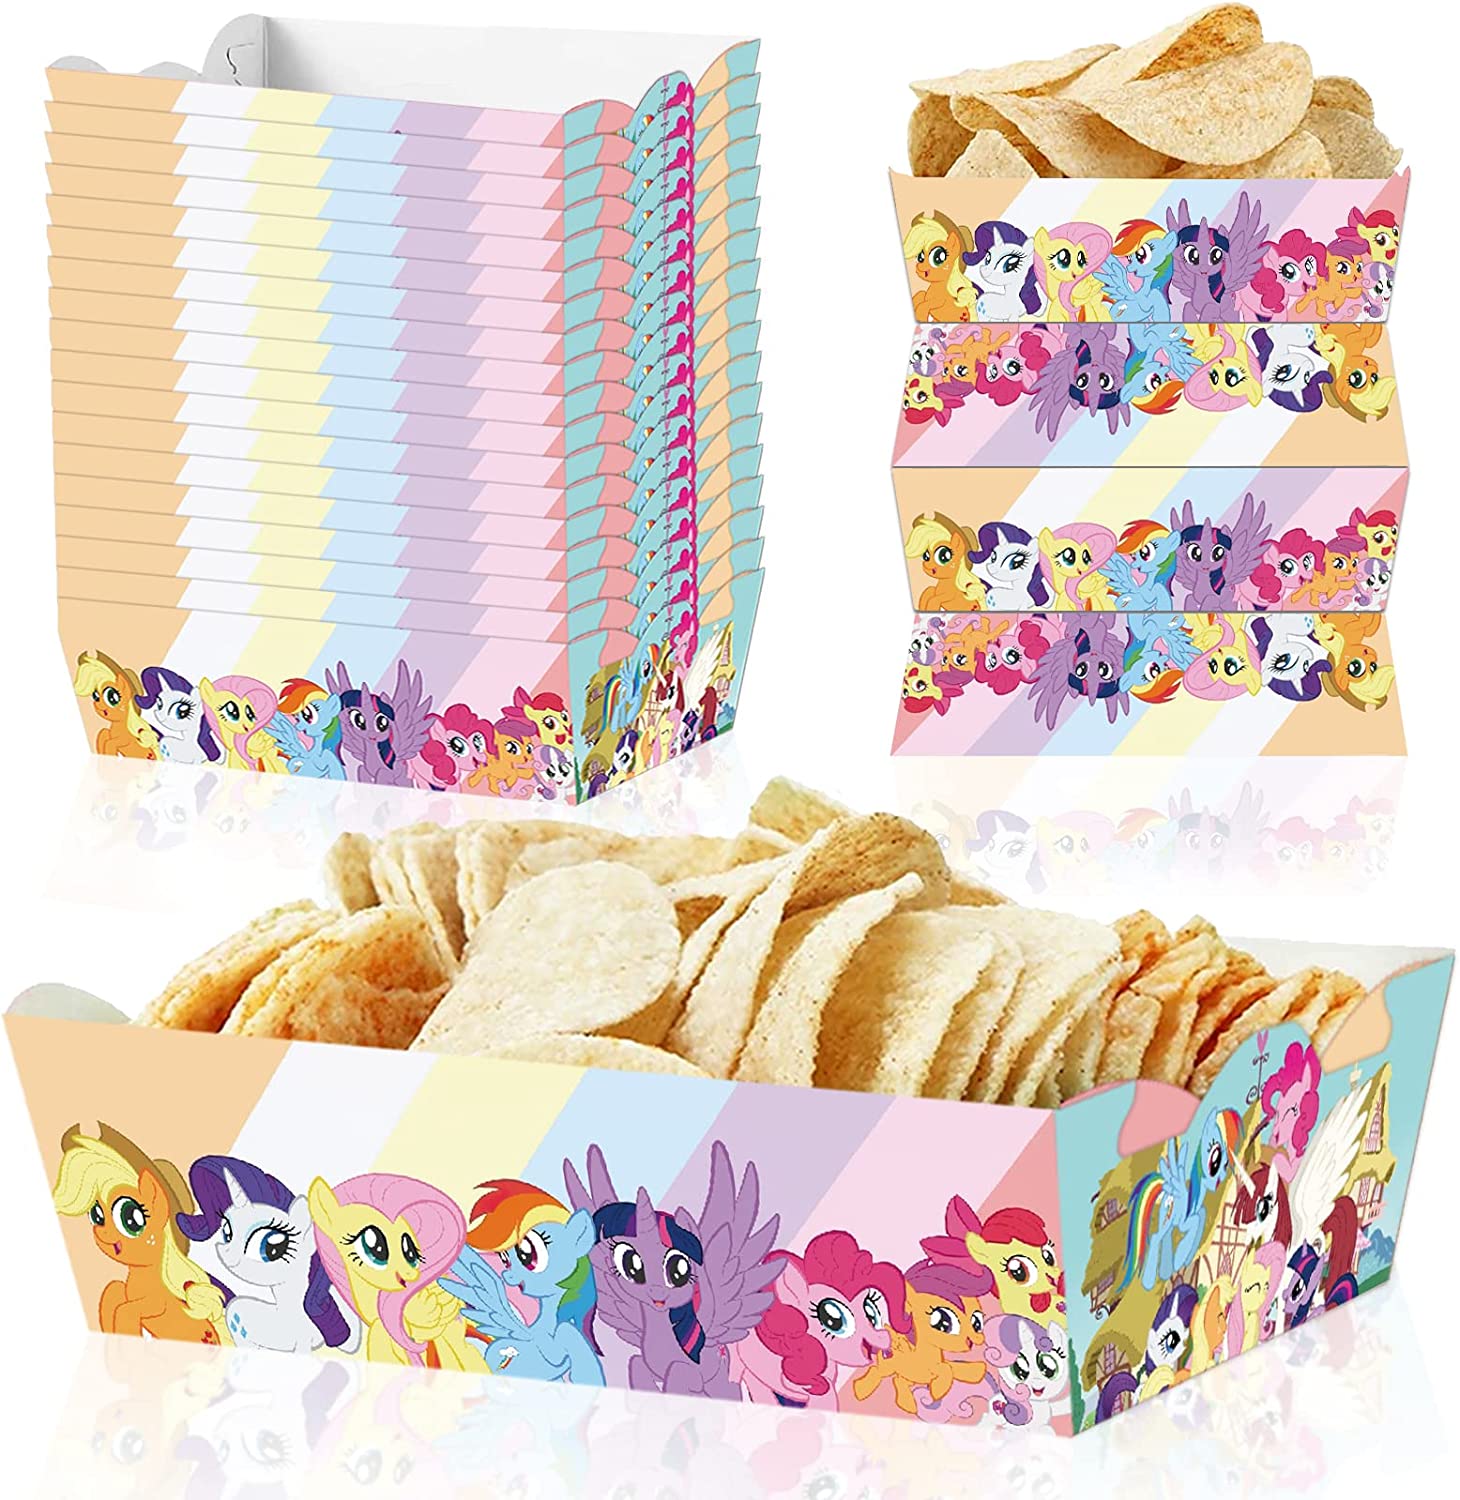 MLP Birthday Party Food Serving Tray 60-Pack 1